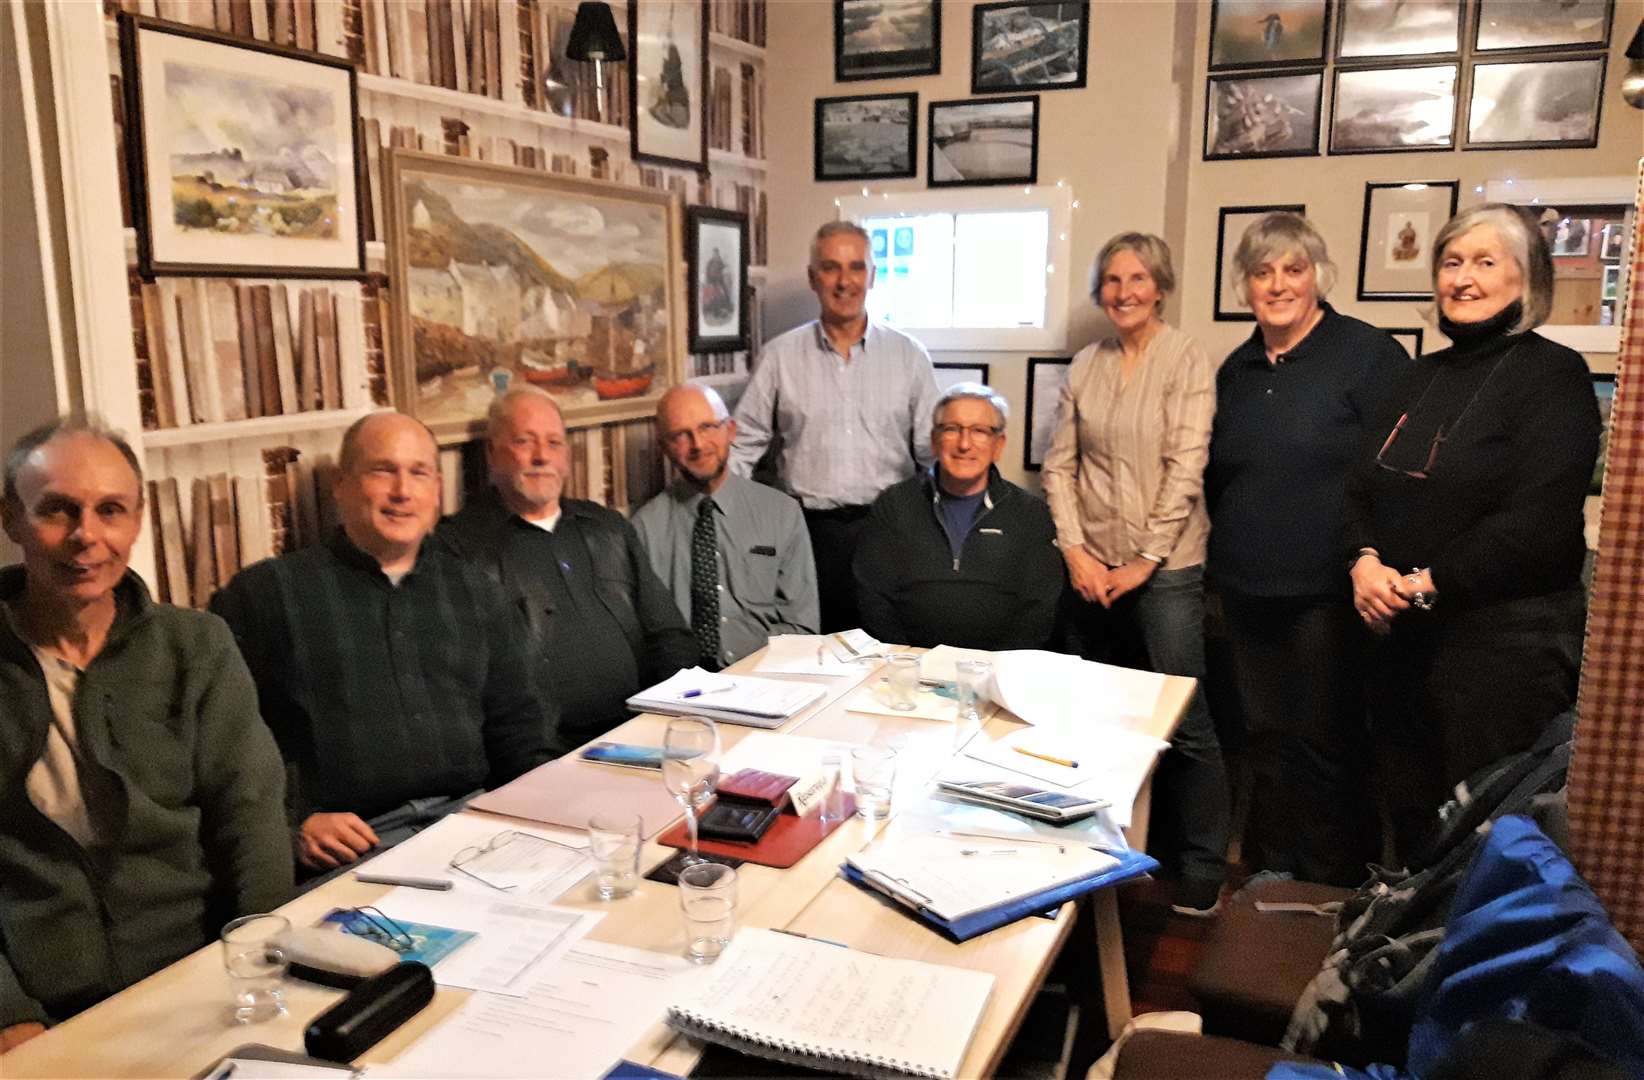 From left: Charlie Bain, Jay Wilson (chairman of JOGT), David Hannah, councillors Matthew Reiss and Karl Rosie, Jon Jenkins, Alison Smith, Jane Coll and Penny Kane who was taking the minutes.